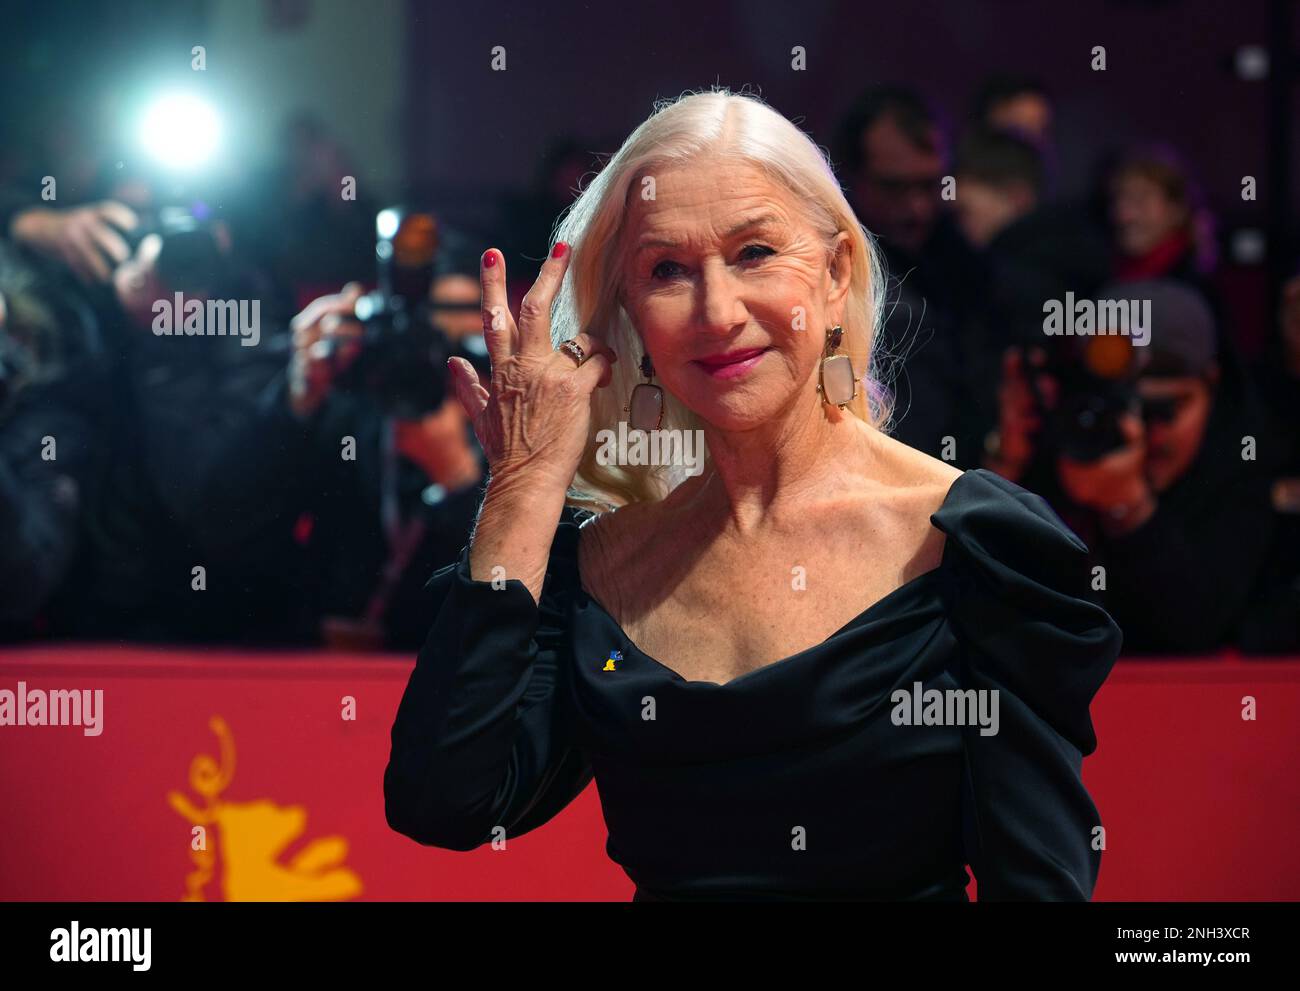 https://c8.alamy.com/comp/2NH3XCR/berlin-germany-20th-feb-2023-helen-mirren-arrives-at-the-berlinale-for-the-screening-of-her-new-film-golda-in-it-she-plays-the-israeli-politician-golda-meir-the-73rd-international-film-festival-will-take-place-in-berlin-from-feb-16-26-2023-credit-soeren-stachedpaalamy-live-news-2NH3XCR.jpg